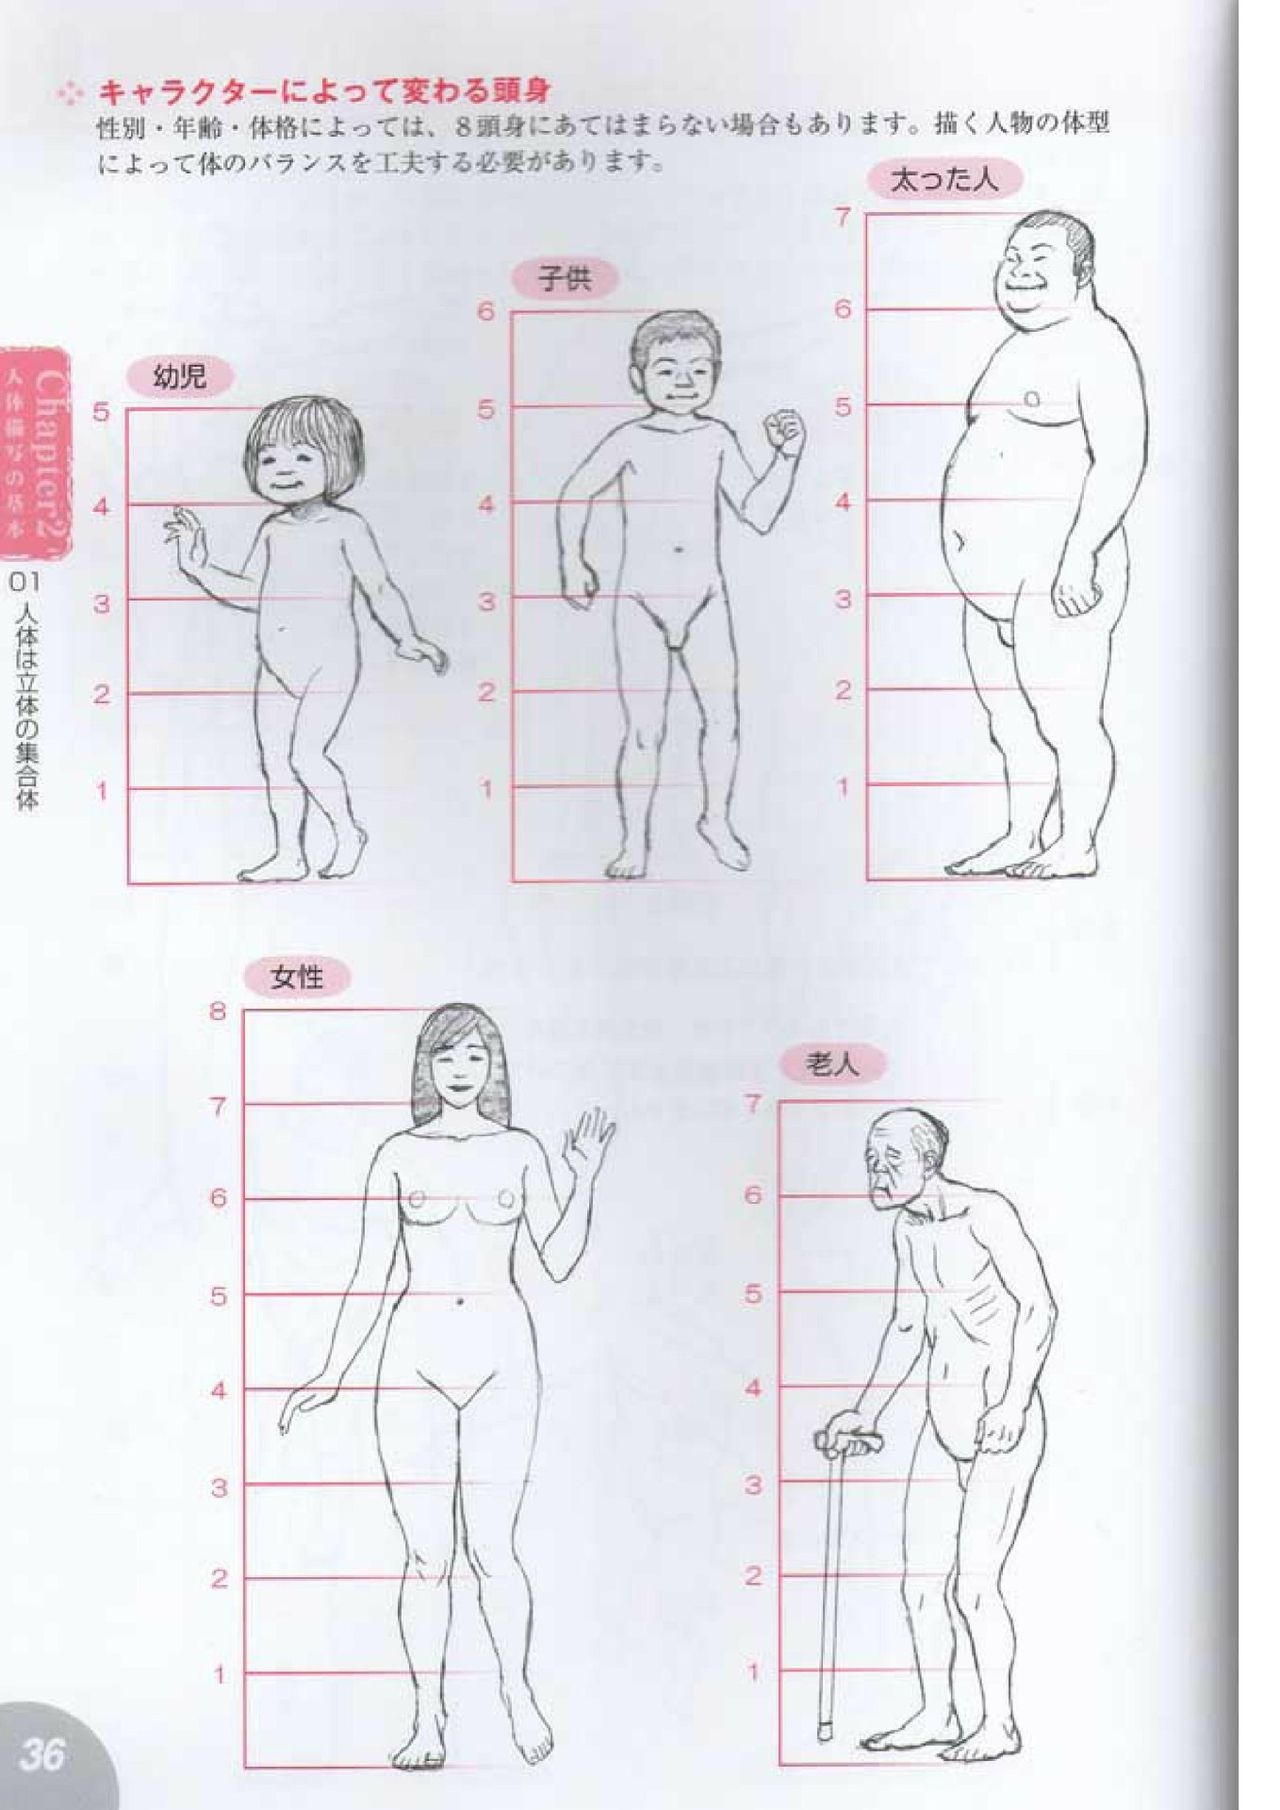 How to draw a character drawing from a human anatomical chart 34